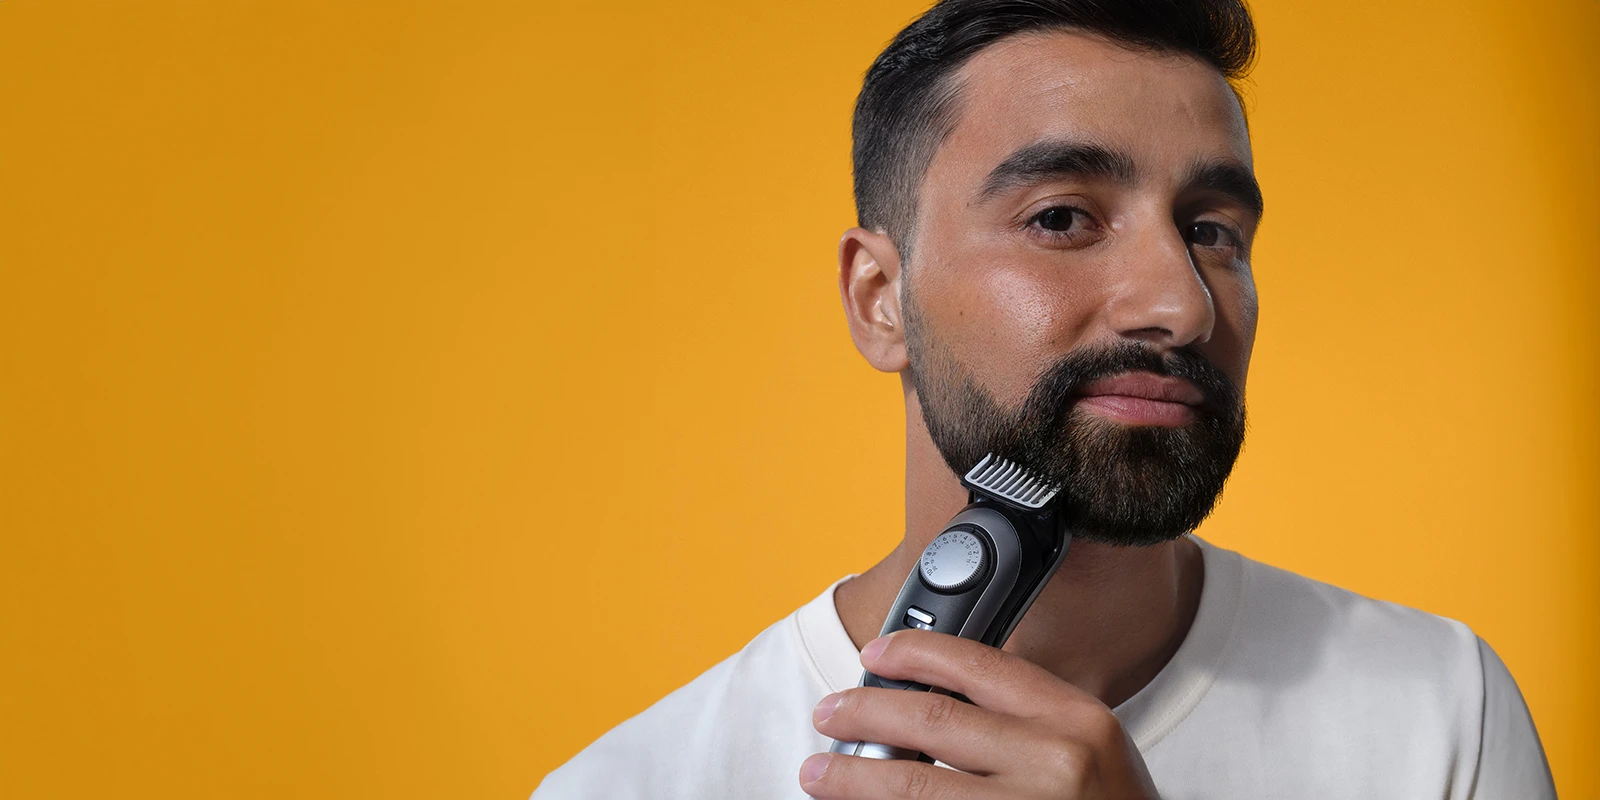 How to get the perfect beard & hair style at home